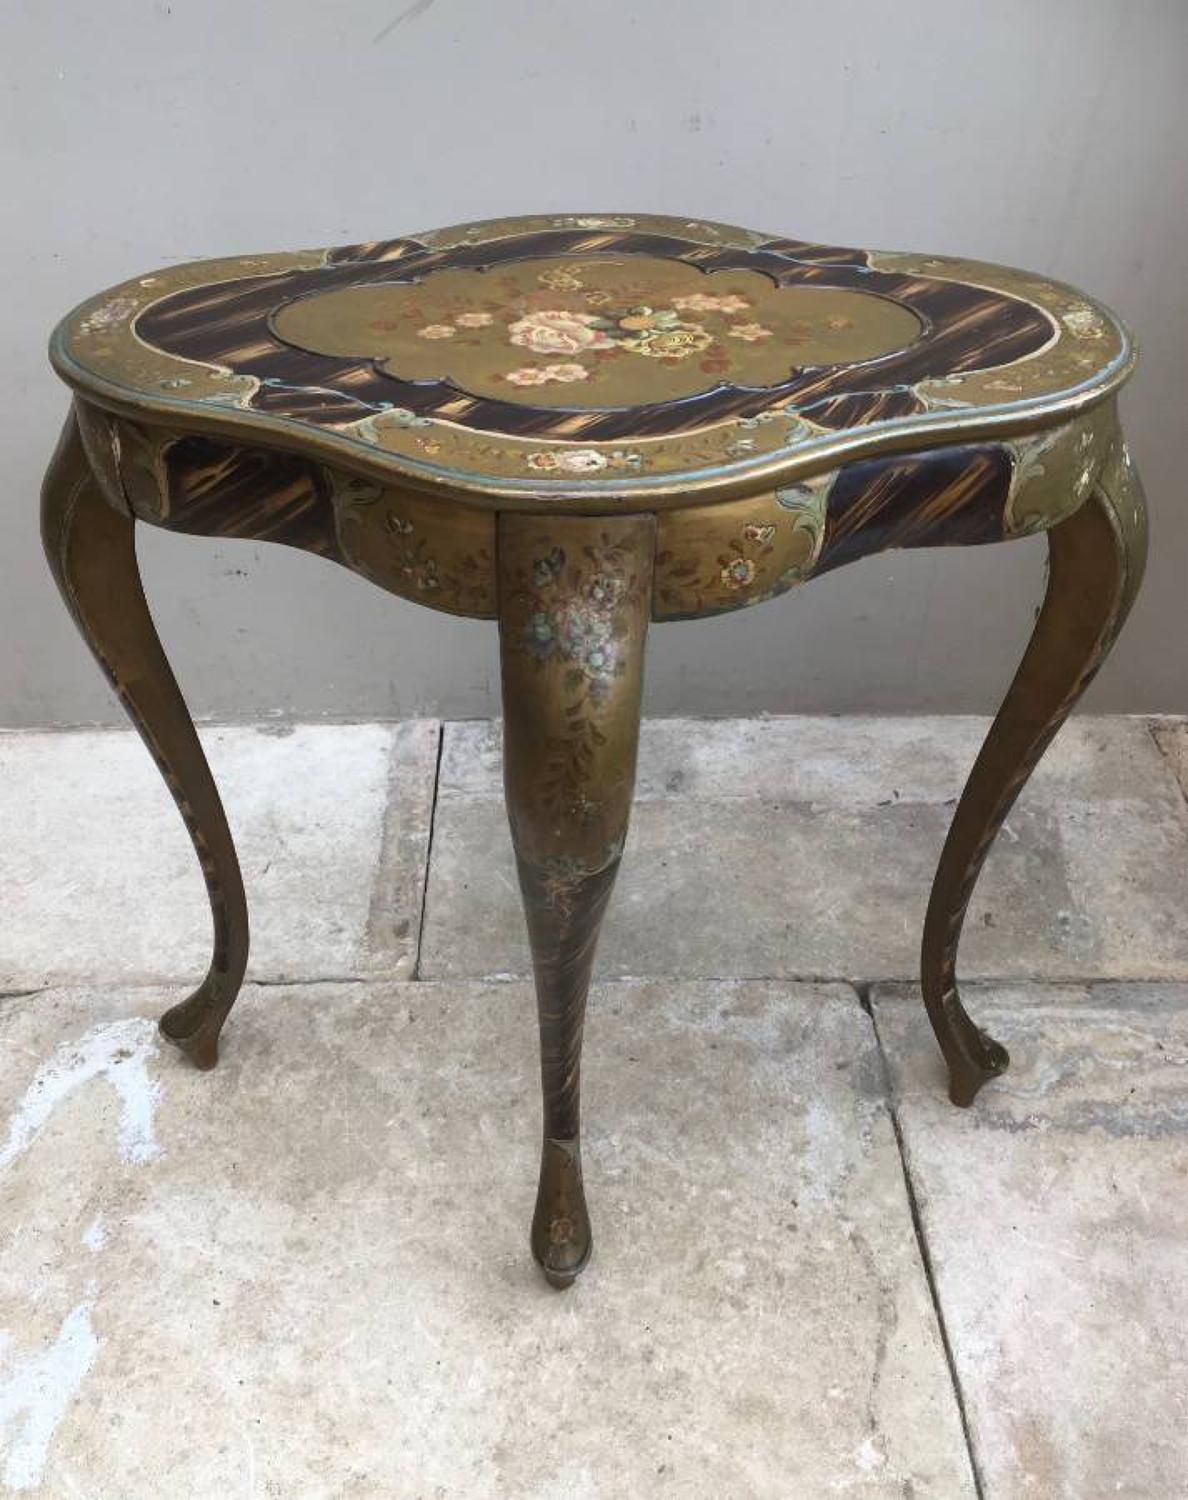 C.1920s Decorative Side Table - Hand Painted